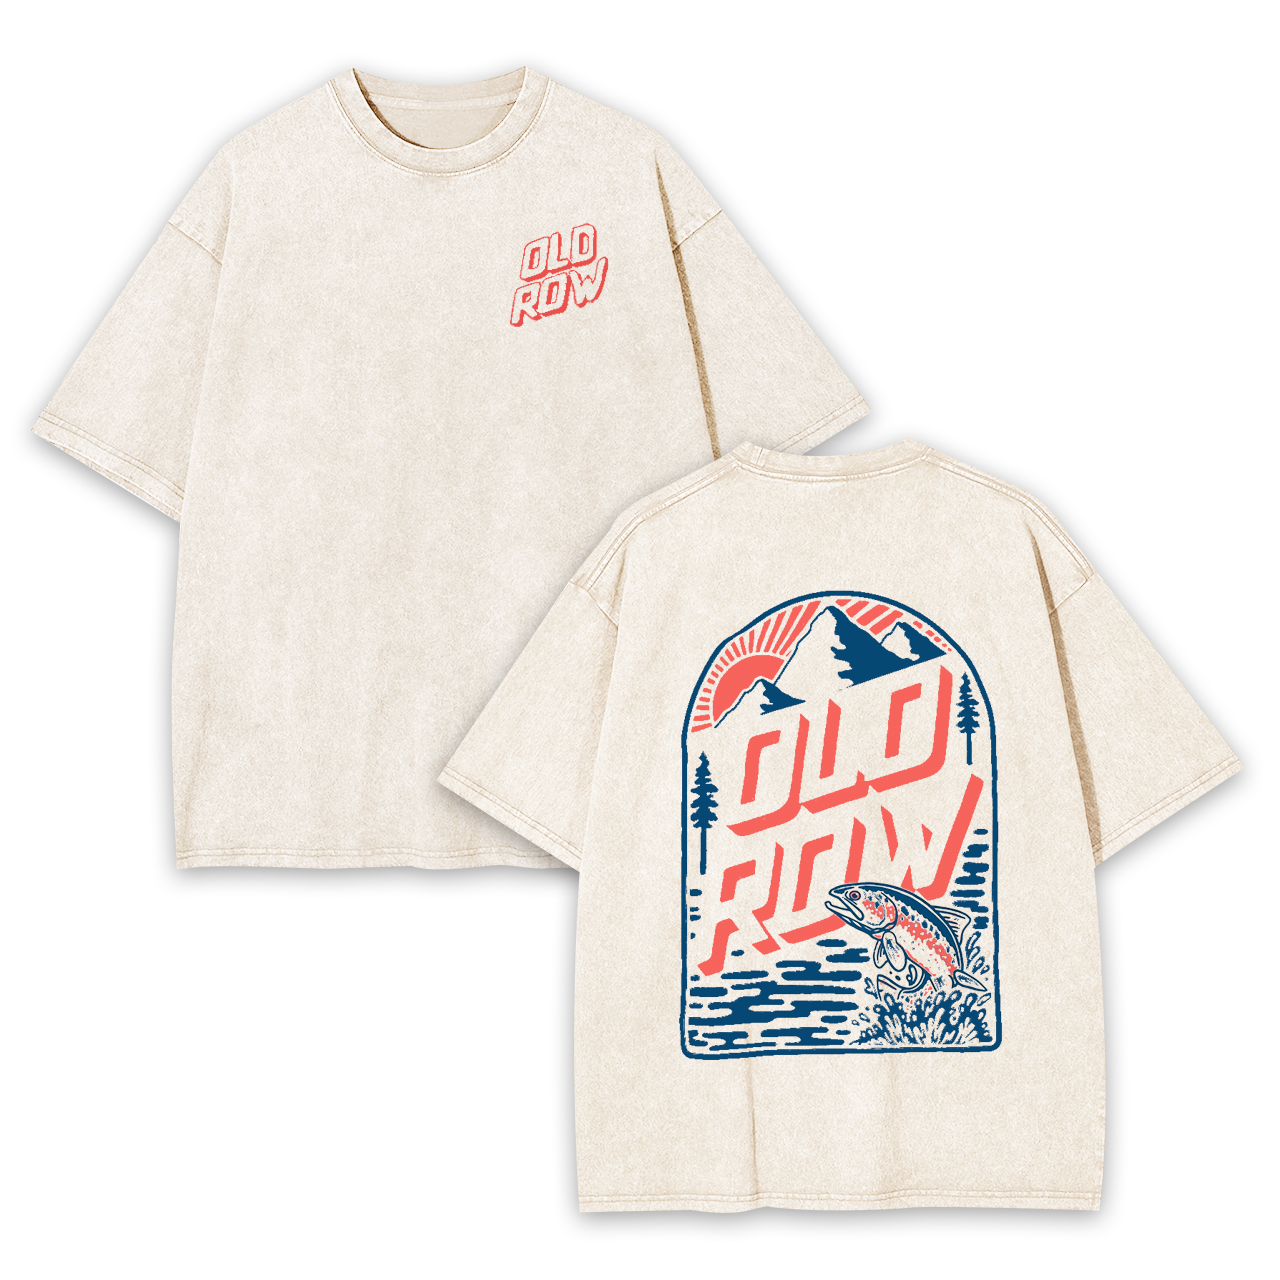 Old Row Outdoors Trout Mountain Garment-dye Tees